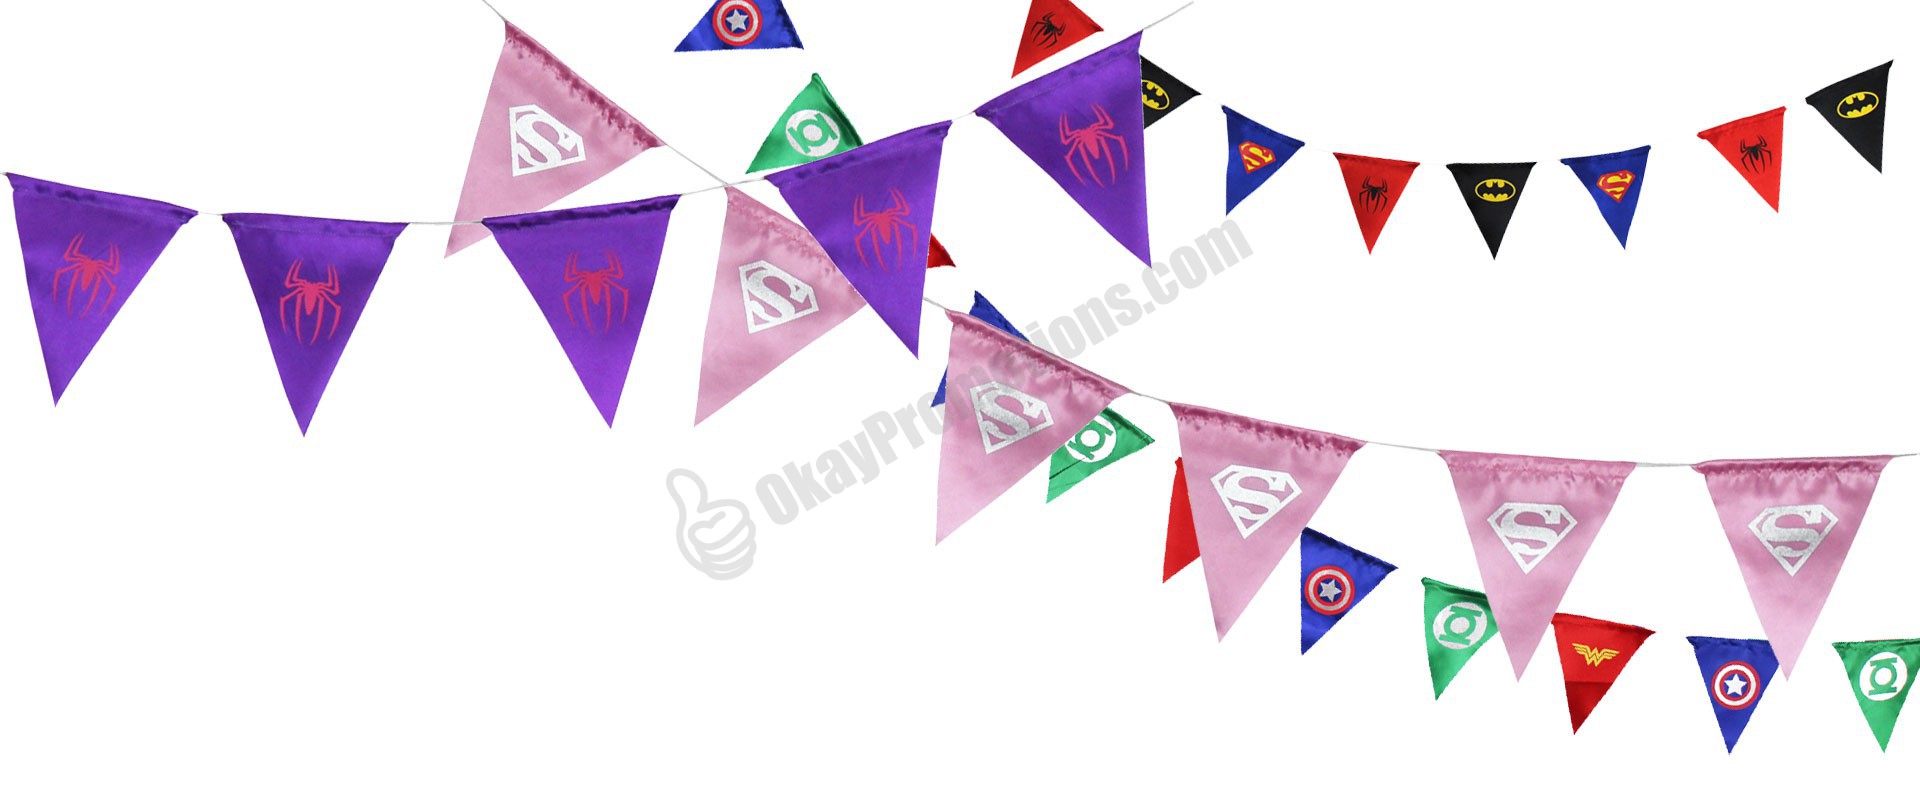 Custom Logo Imprinted Promotional Pennants String Banners Line Trade Show Party Decorations Business Sales Marketing Activities Decor